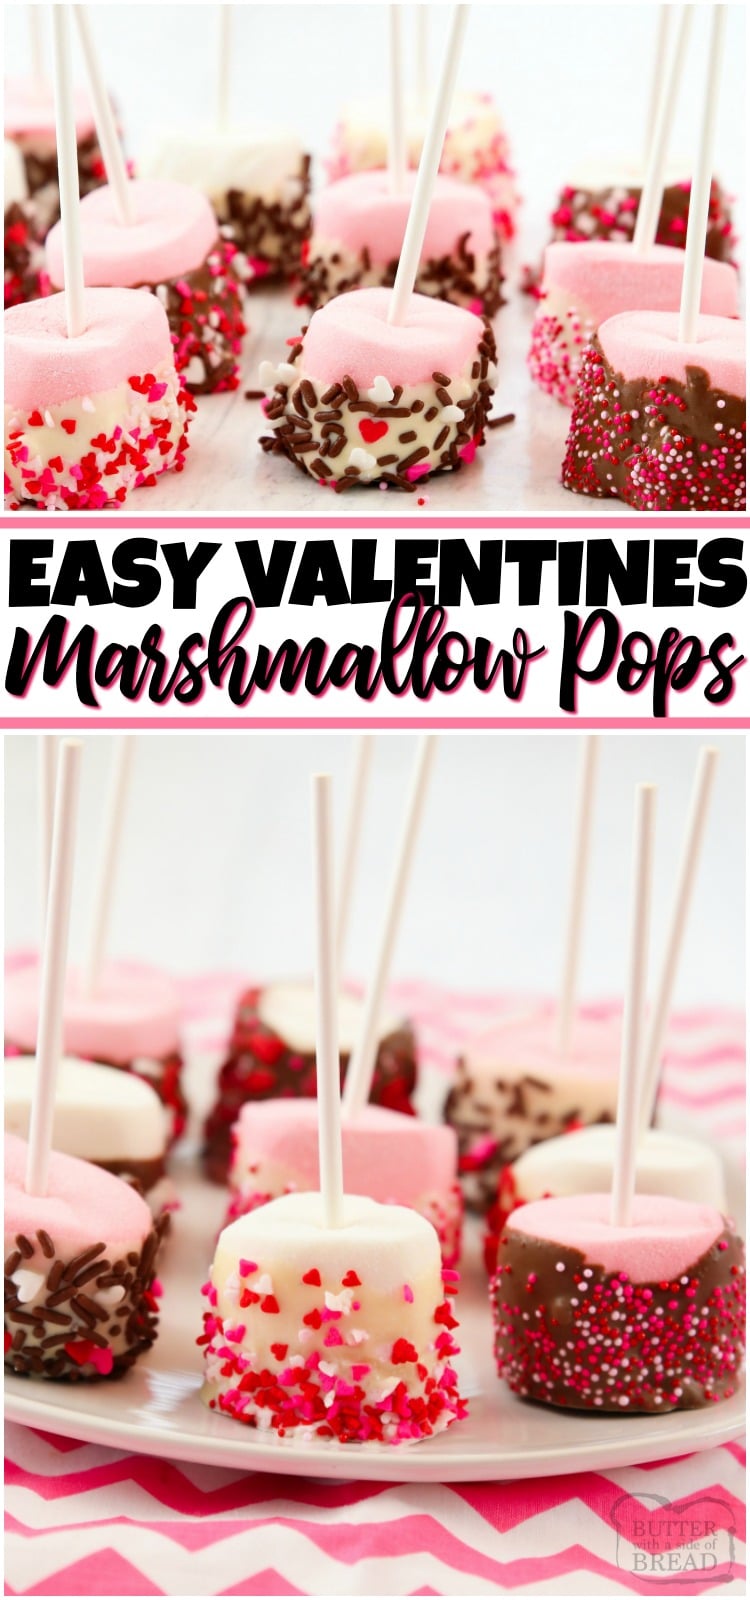 Easy Valentines Marshmallow Pops are the perfect last minute Valentines Day treats! Made fast with just 4 ingredients & great for kids. Marshmallows dipped in chocolate and covered in Valentines sprinkles. #Valentines #chocolate #dessert #marshmallows #sprinkles #ValentinesDay #treat from BUTTER WITH A SIDE OF BREAD